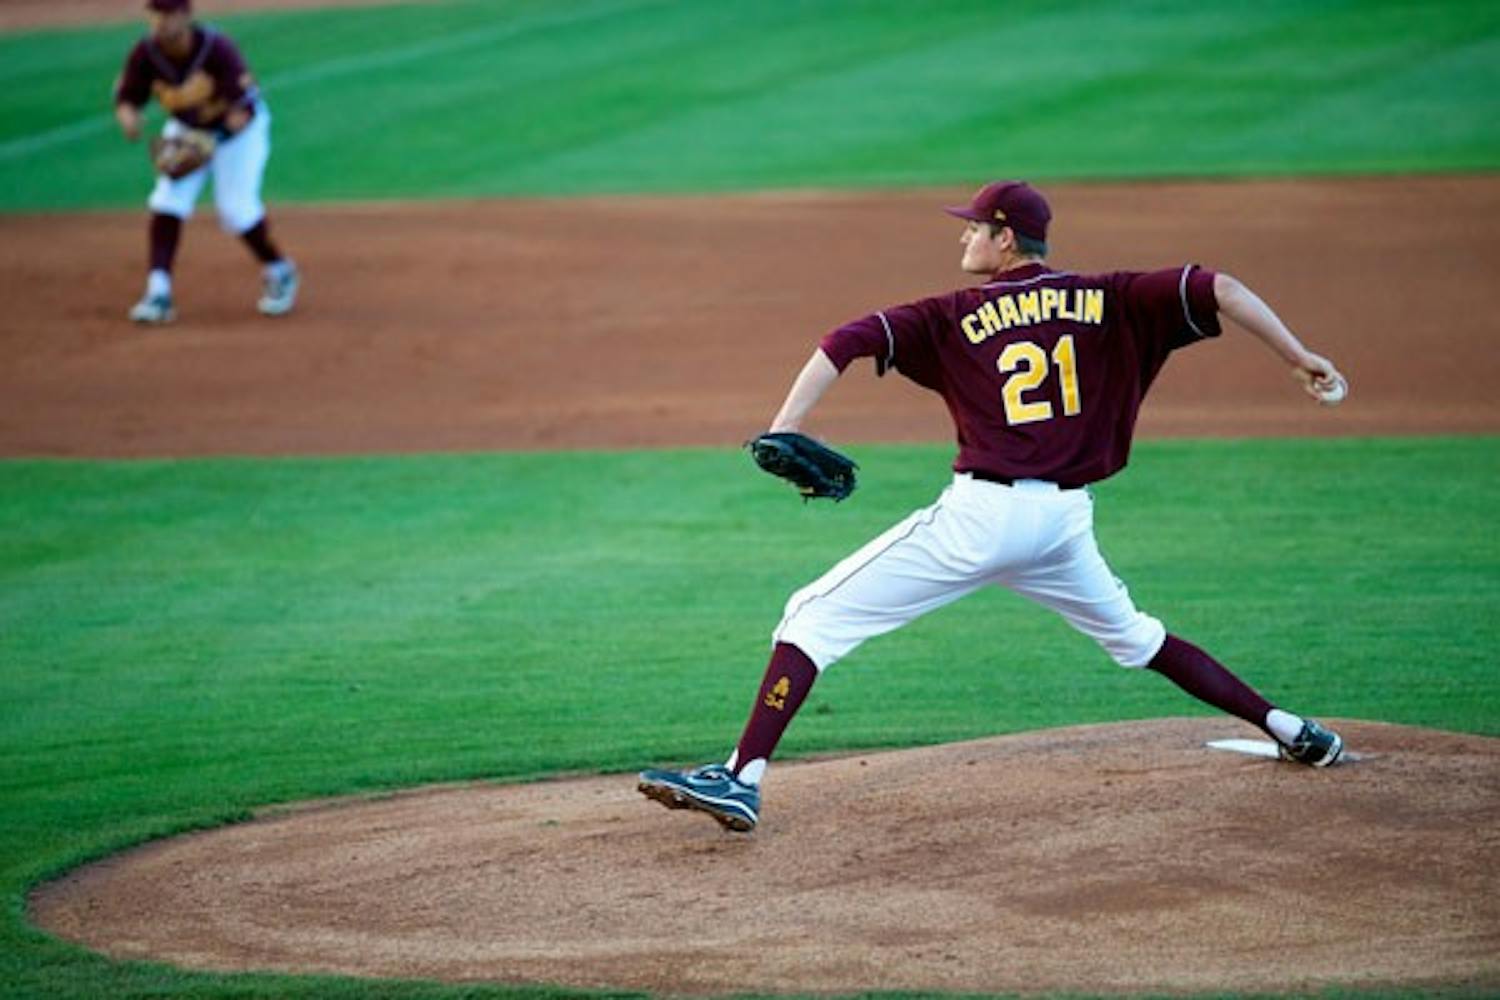 Marathon: ASU junior pitcher Kramer Champlin delivers a pitch against Oregon on April 2 in Tempe. Champlin is set to start the second game of the series against Cal on Friday after a long, 17-inning game against the Golden Bears on Thursday. (Photo by Michael Arellano)